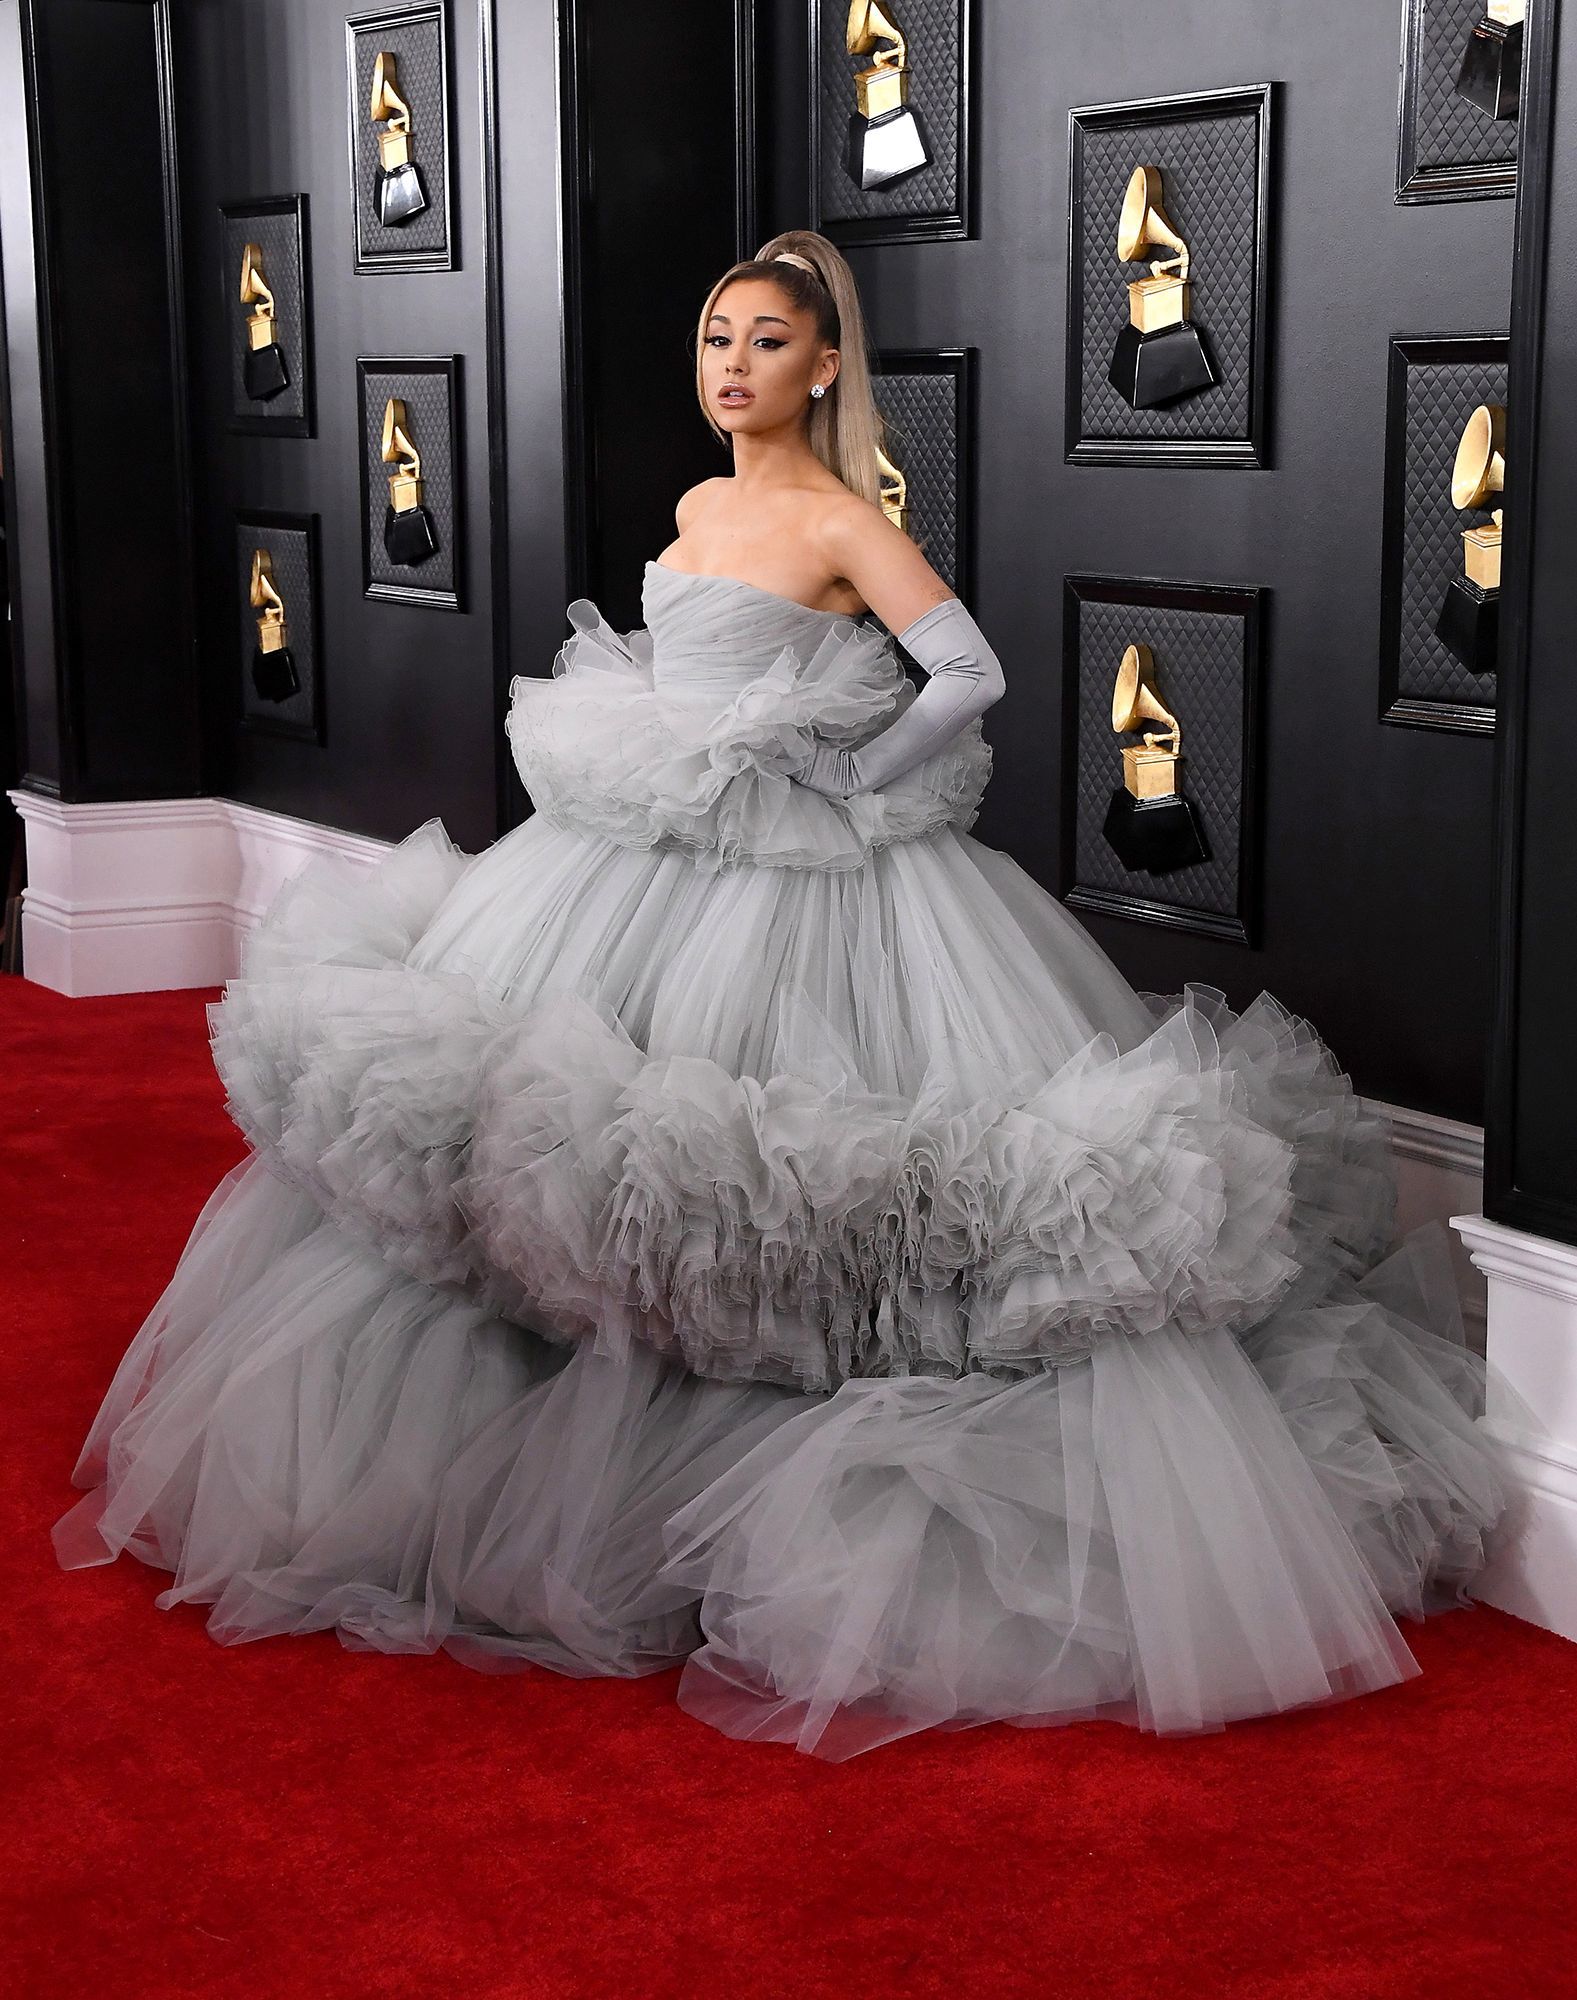 Grammys' Best Dressed Celebrities Of 2020: Ariana, Lizzo And More